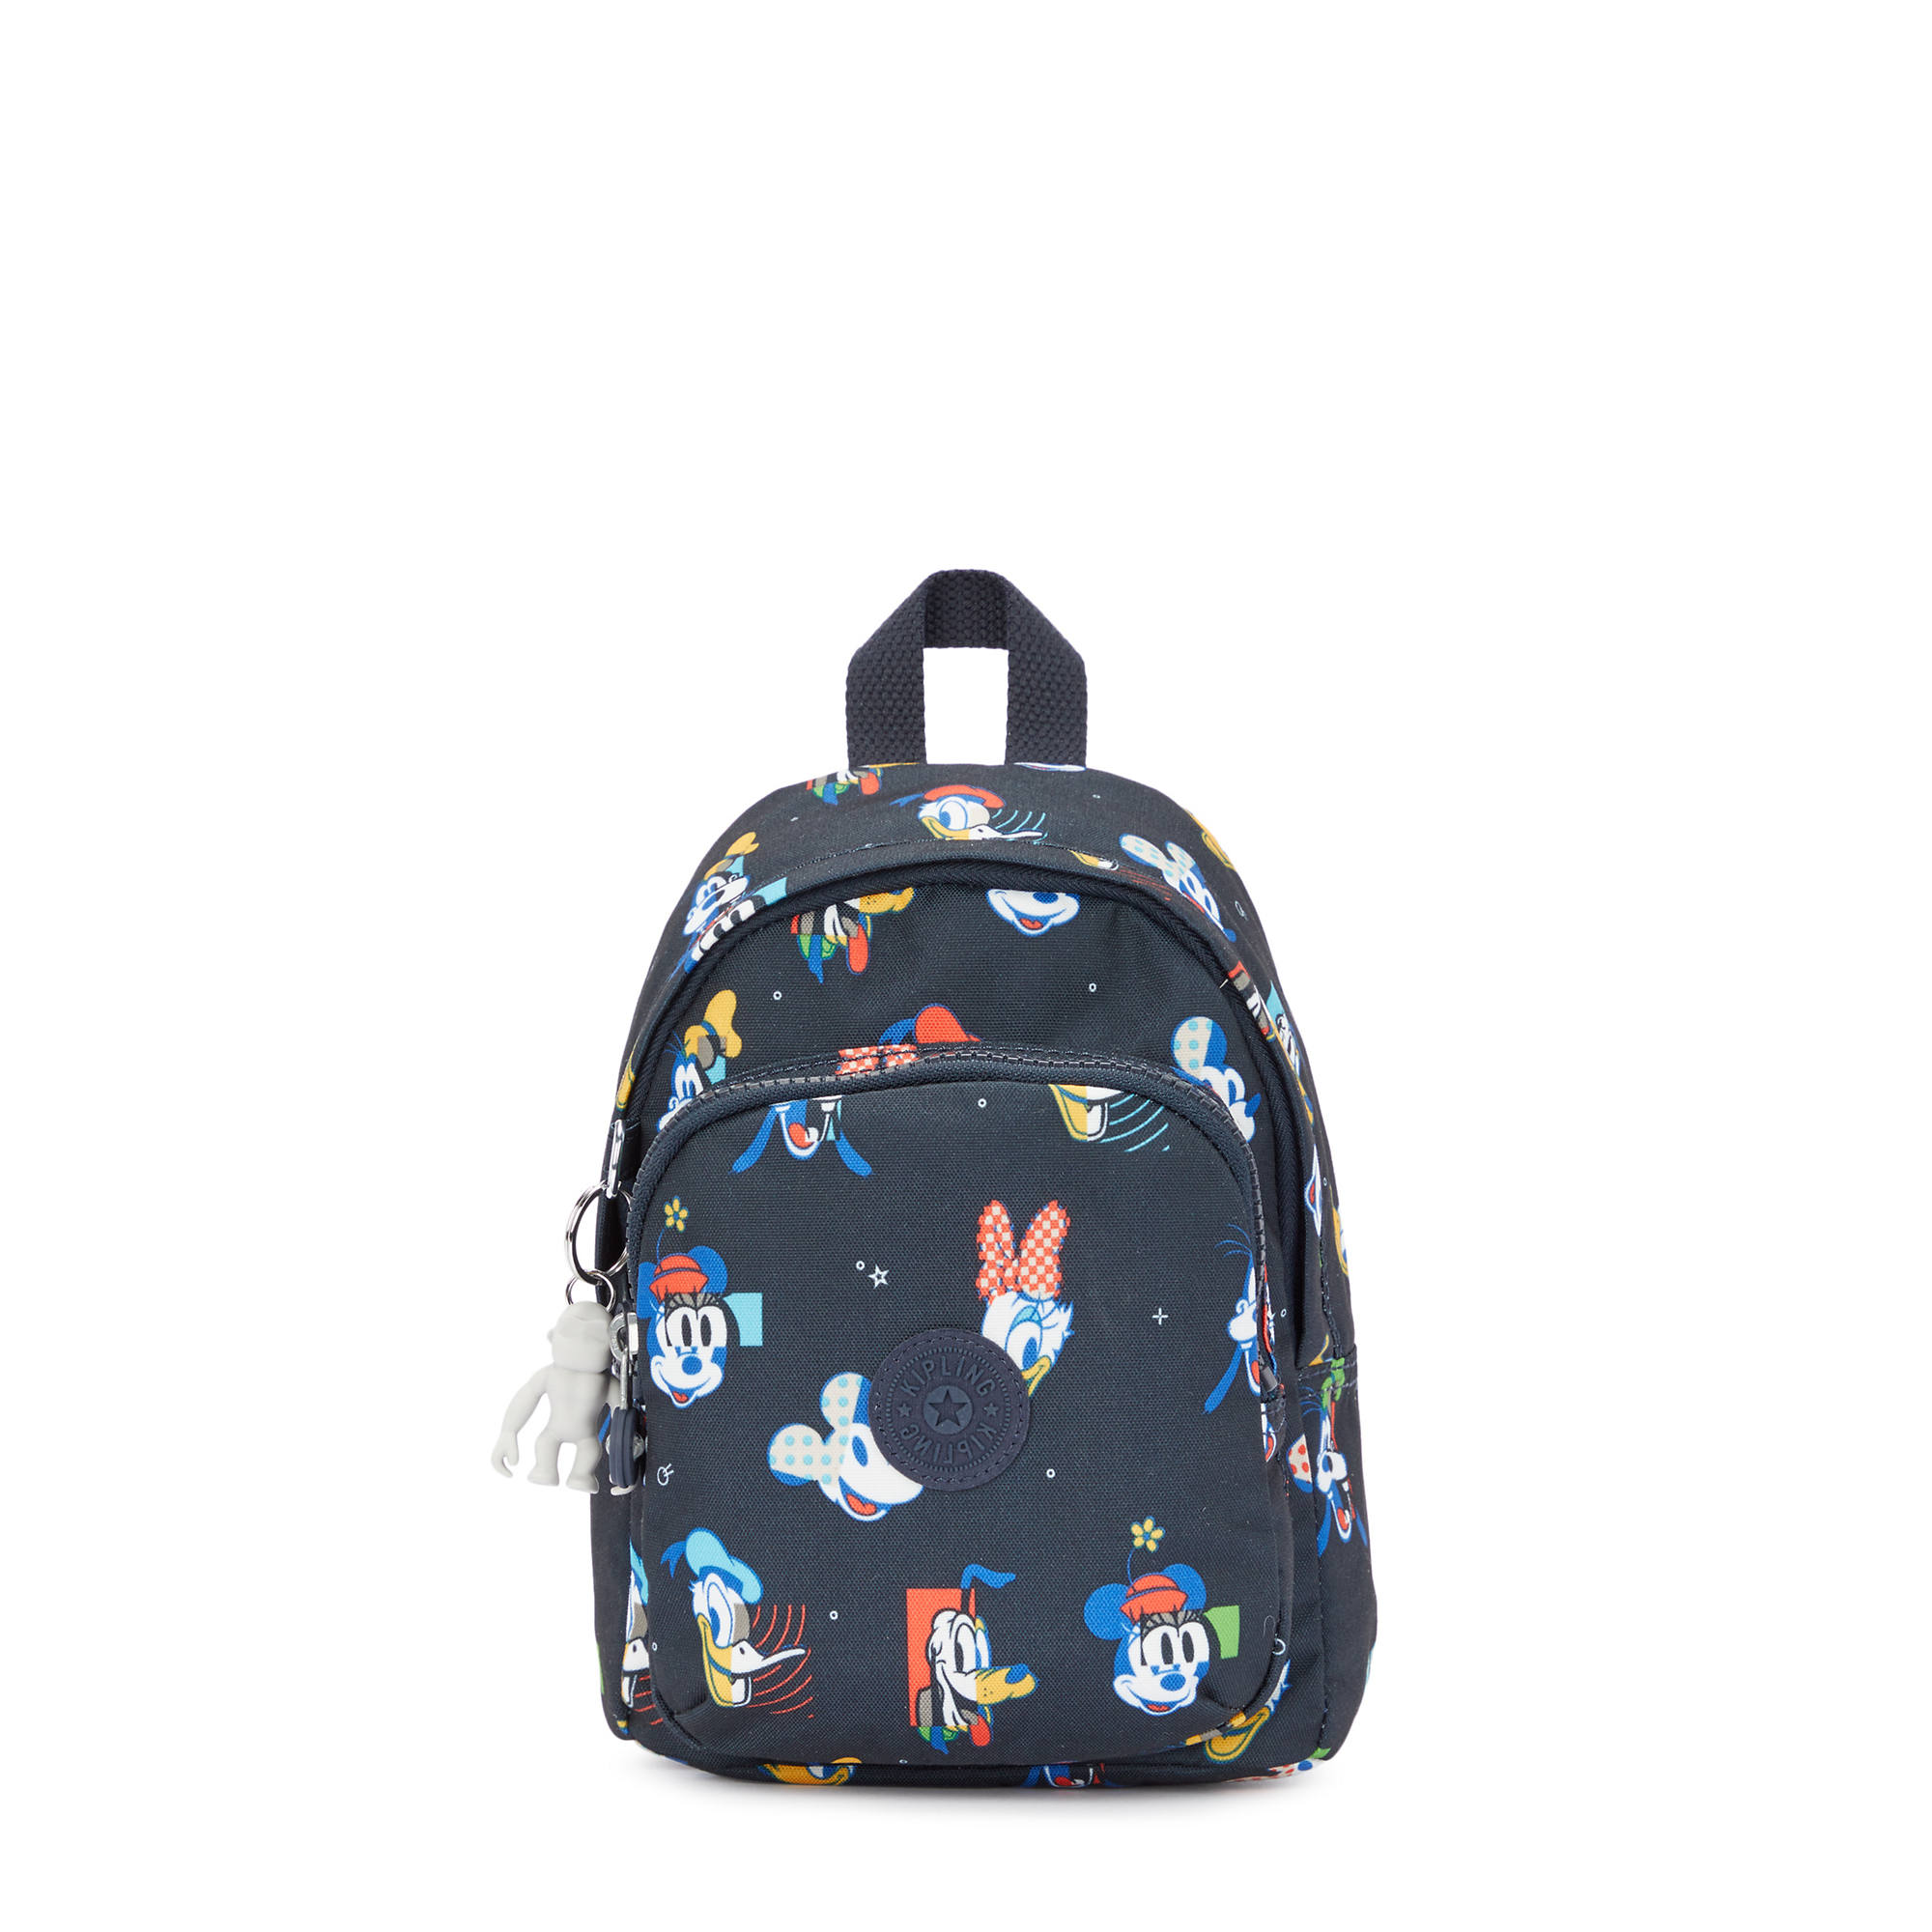 Loungefly: Black Backpacks now at $21.95+ | Stylight